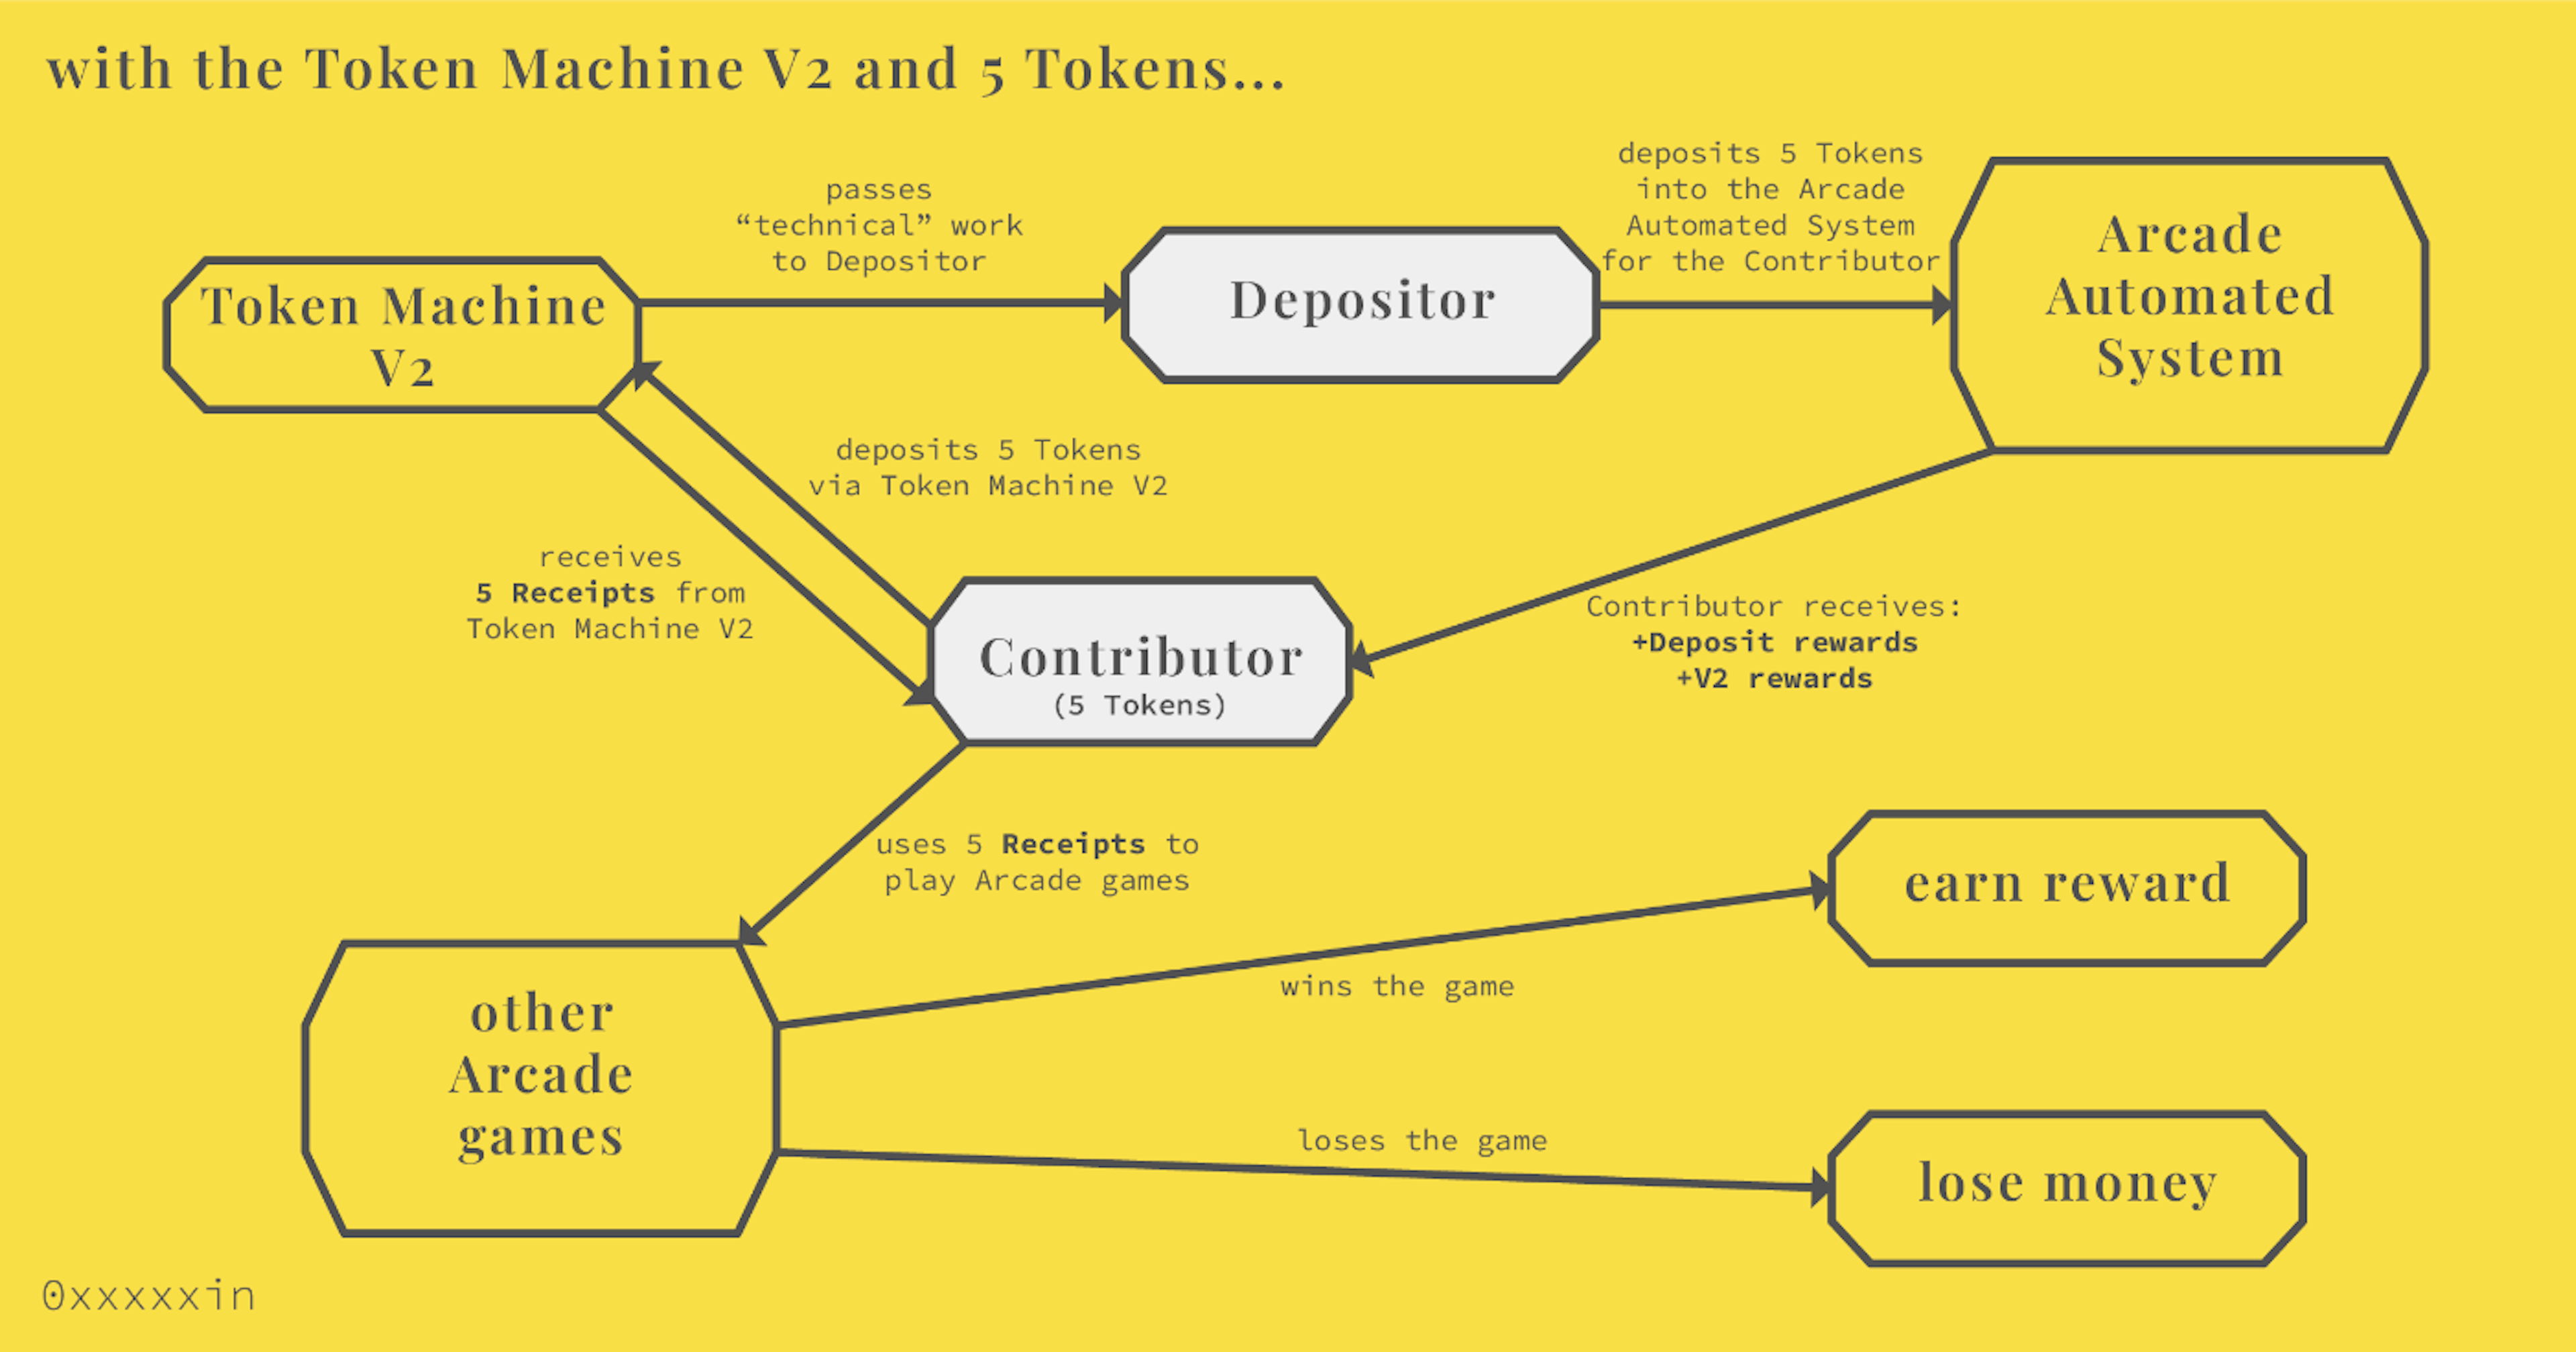 fig 2: Contributor user experience with Token Machine V2